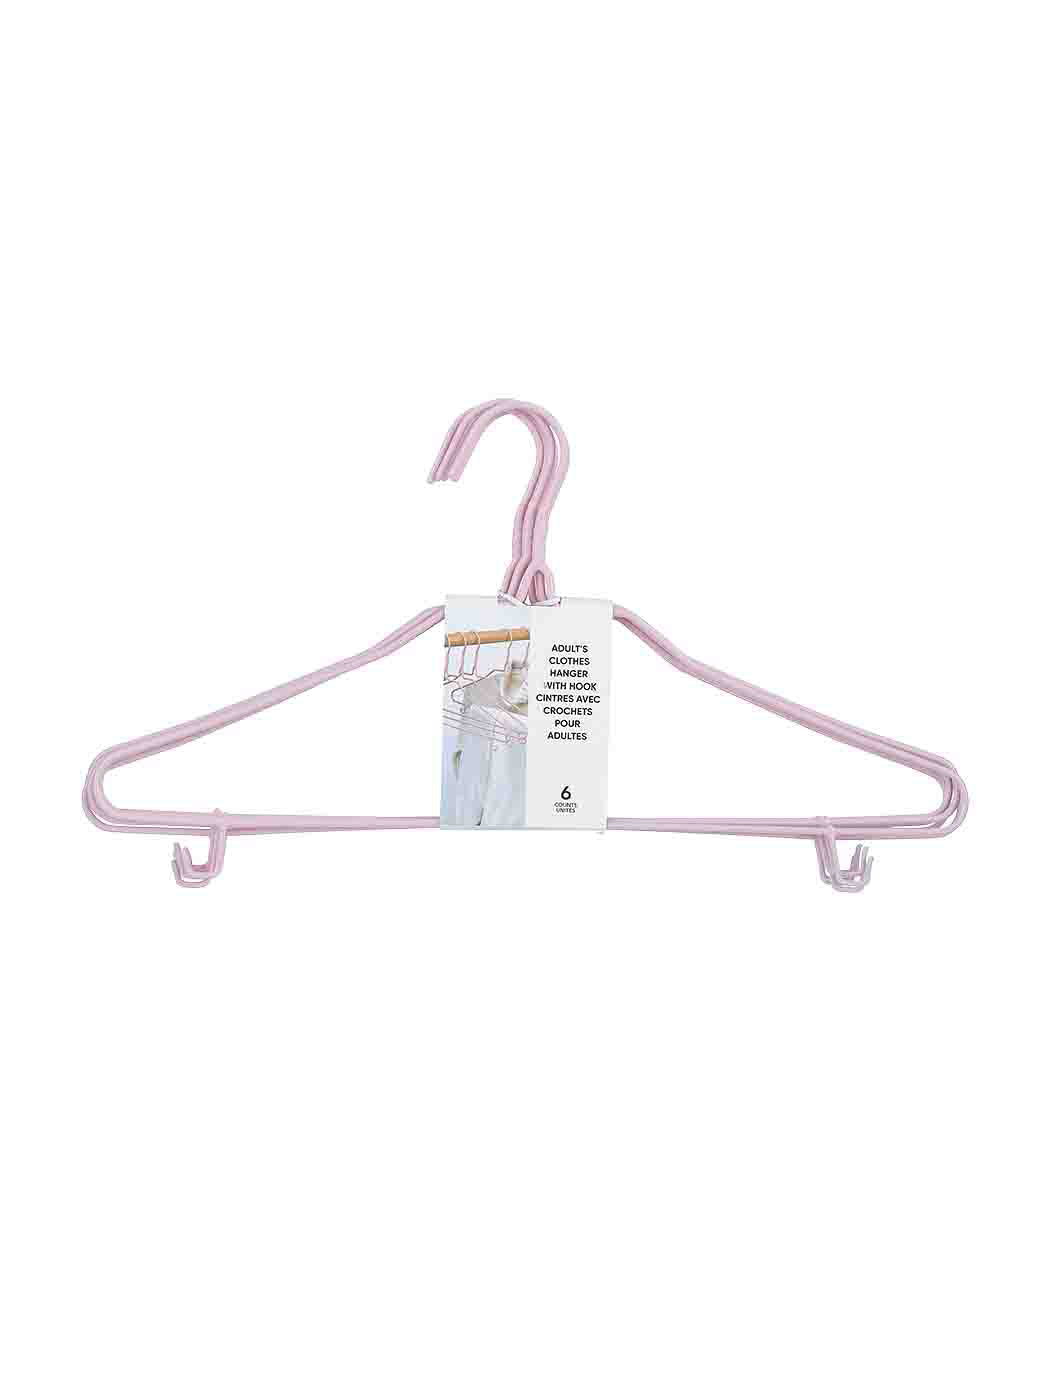 MINISO ADULT'S CLOTHES HANGER WITH HOOK 6PCS(PINK) 2010309411108 CLOTHES HANGERS